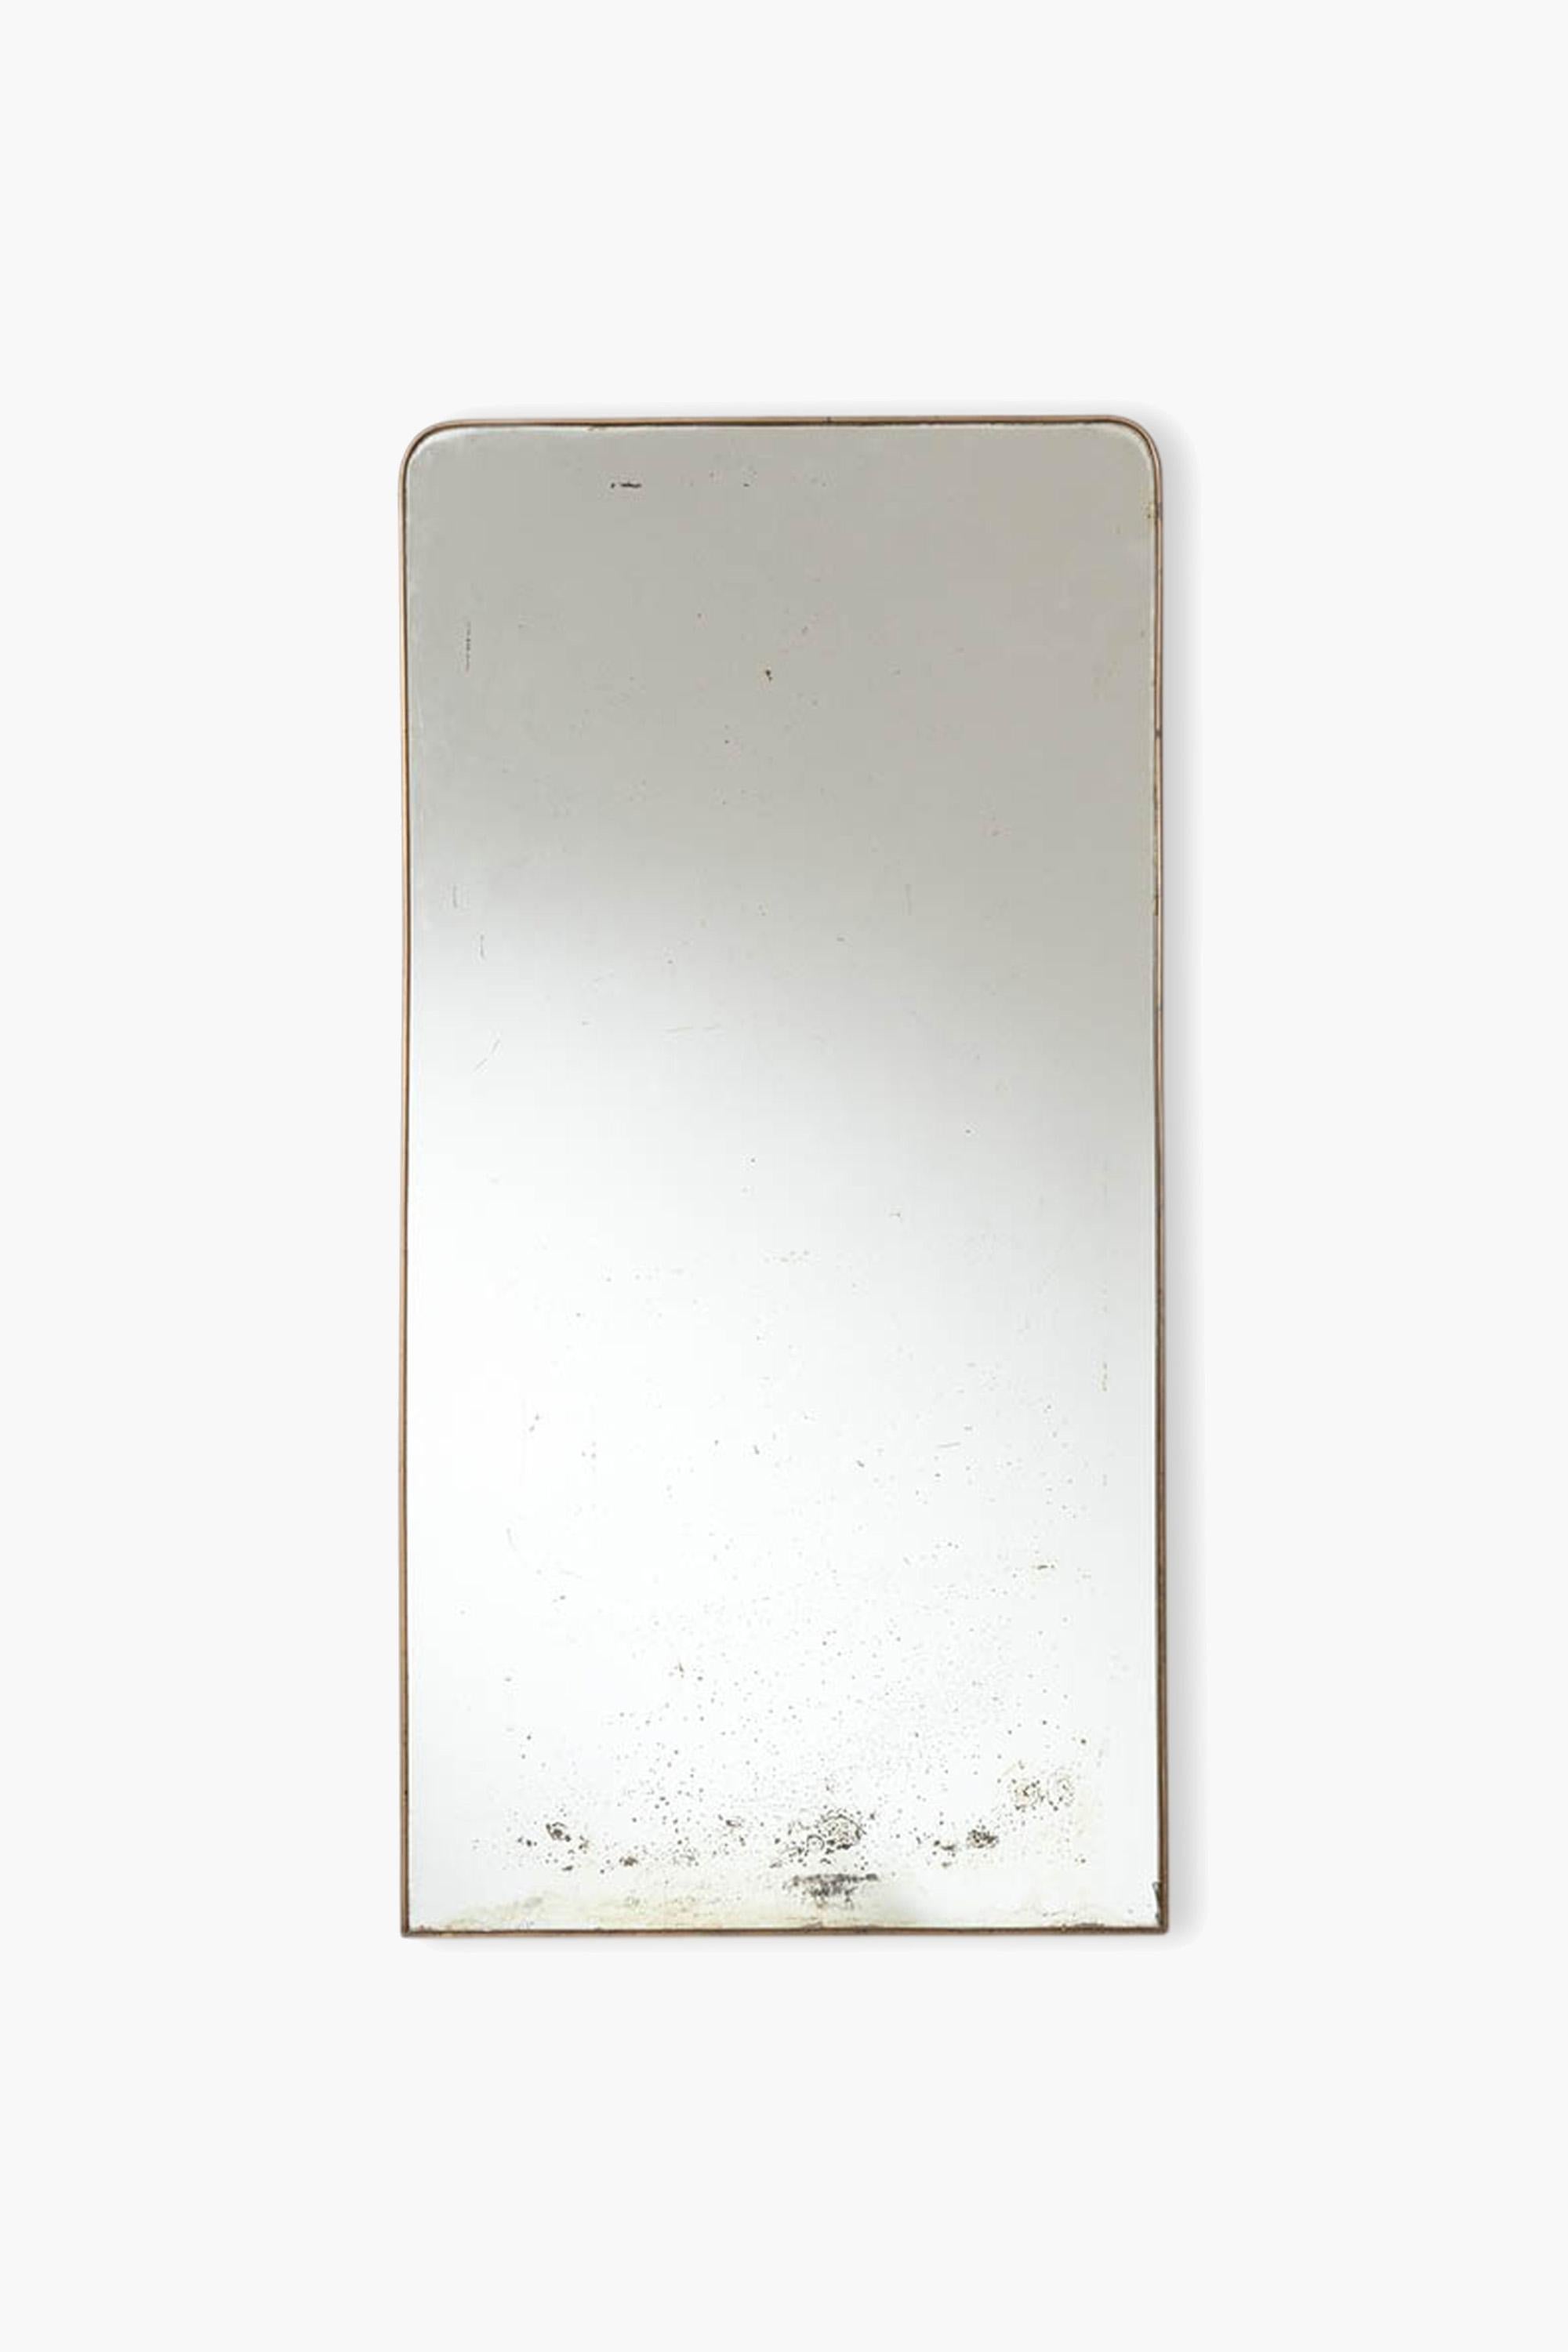 Large Italian Brass Framed Mirror, 1950s

A large 1950s Italian brass-framed wall mirror. Original foxed mirror plate with small losses - can be supplied with replacement new or faux-antique mirror plate if required.

Dimensions: H 121cm x W 51cm x